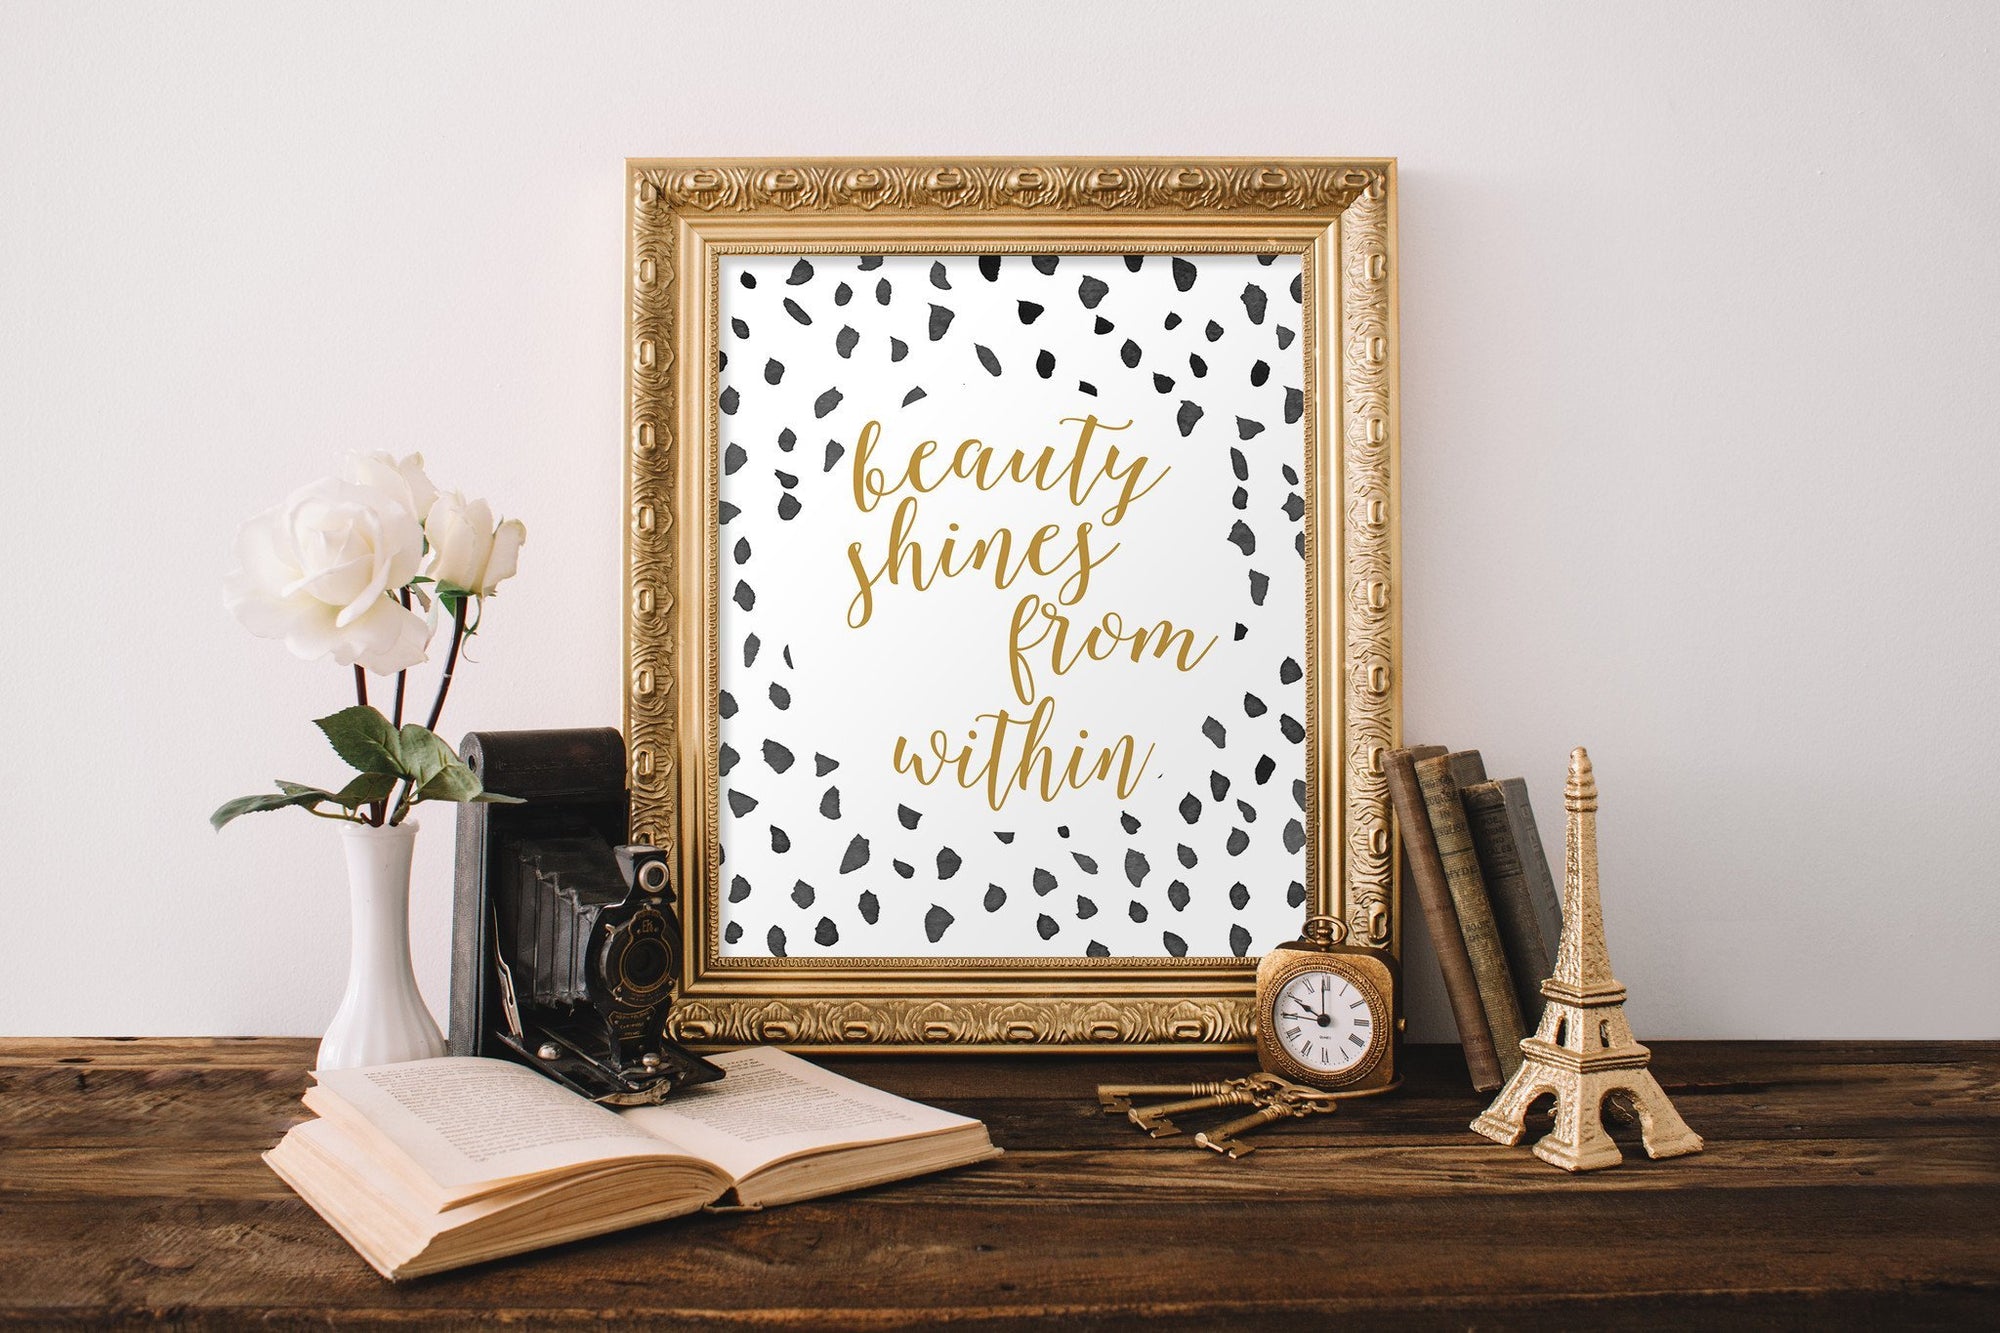 Beauty Shines From Within Printable - Pretty Collected